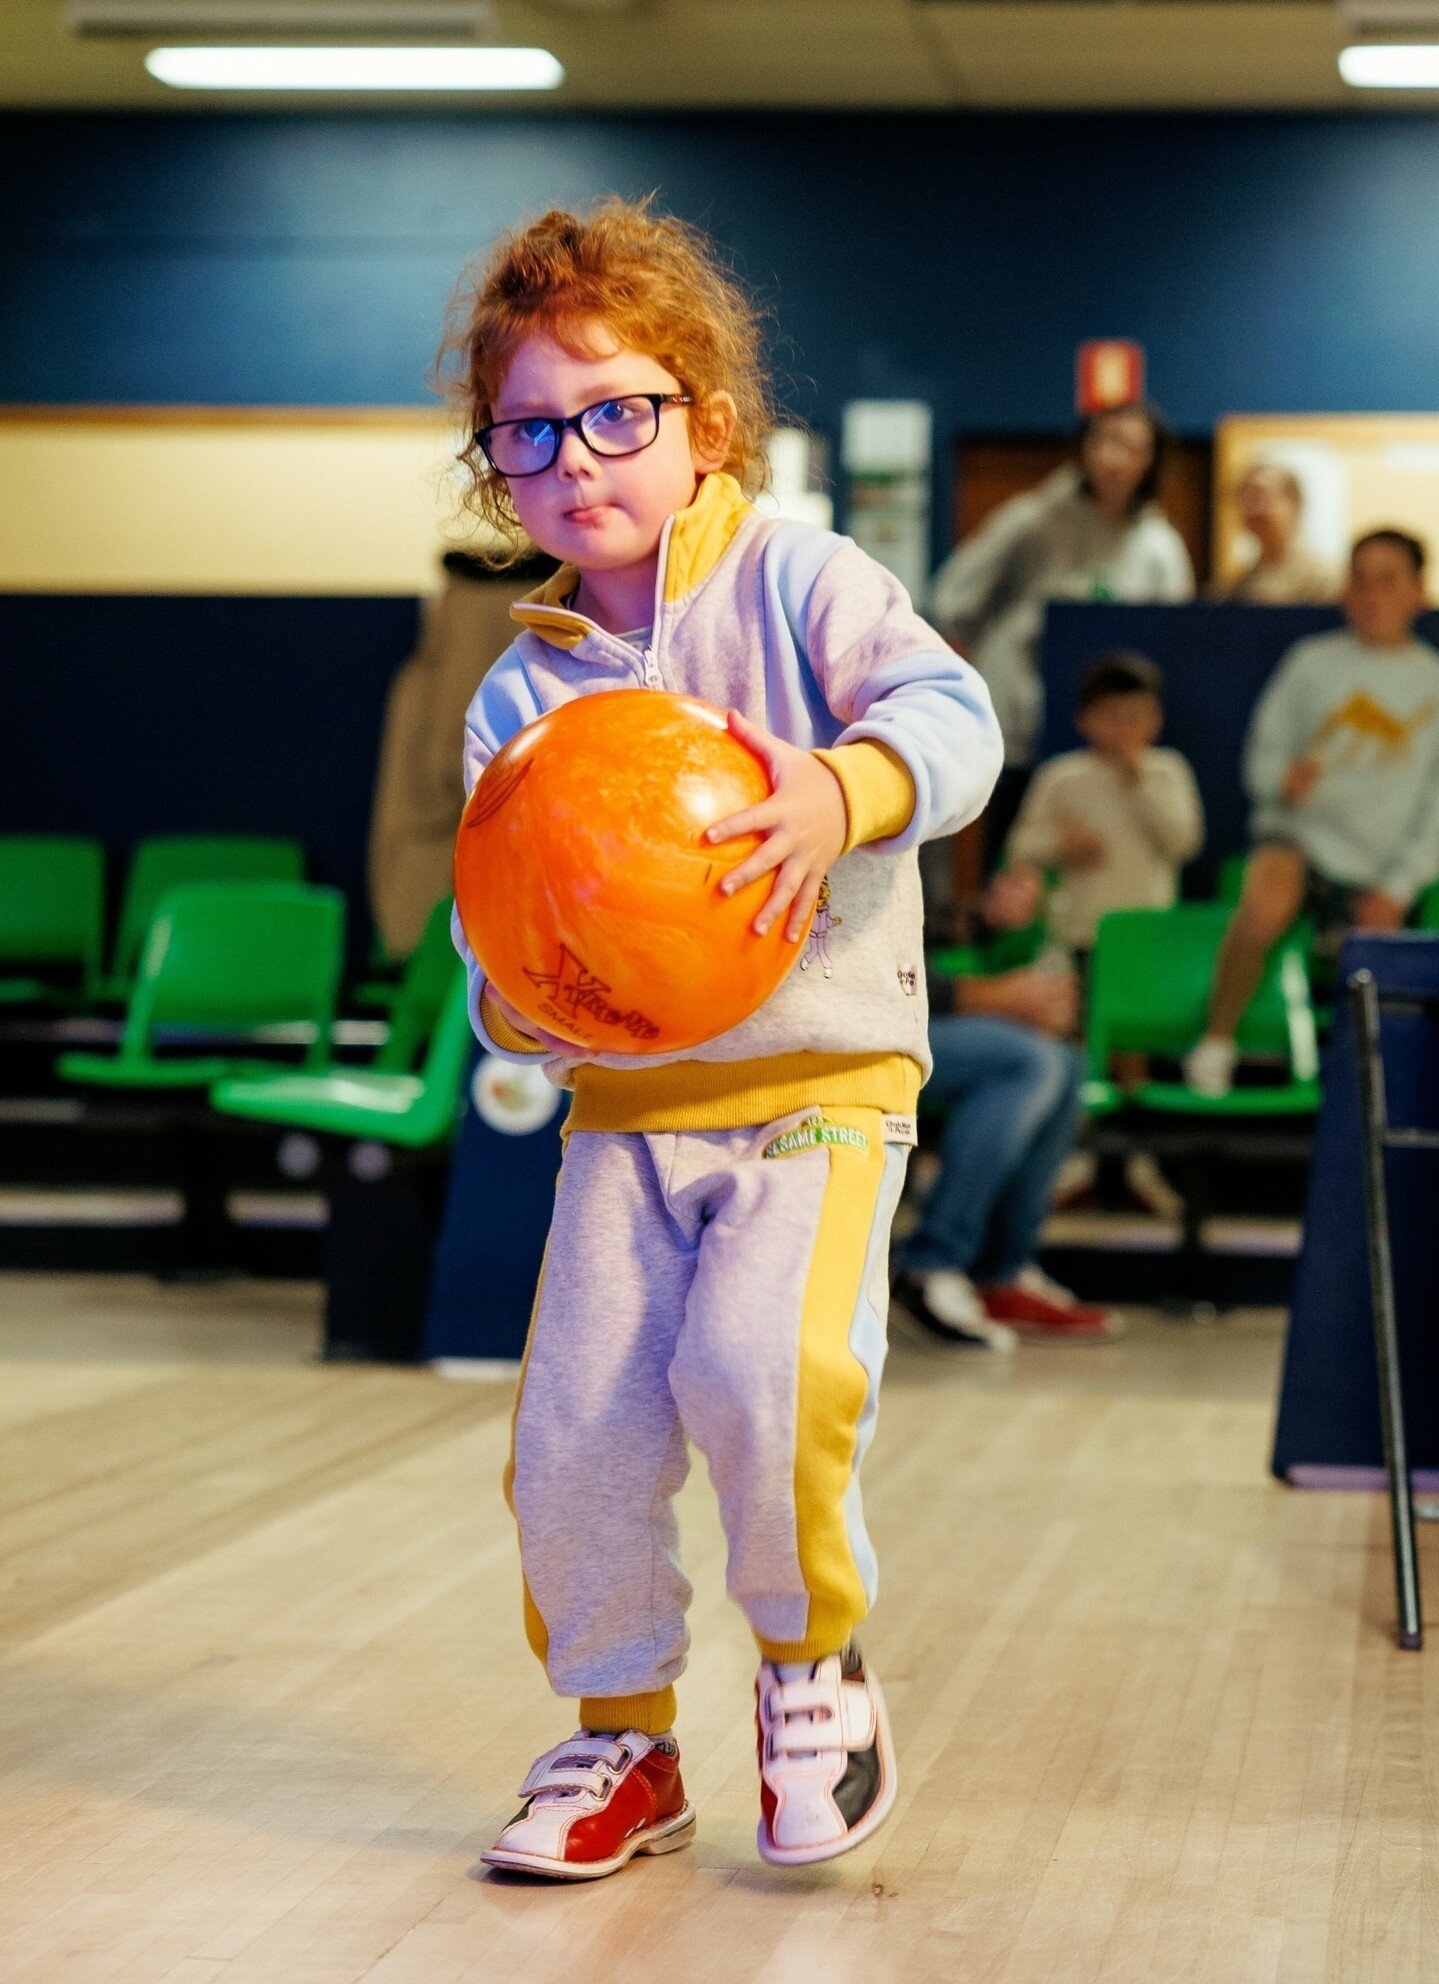 TODDLER TIME 🎳 10am Tuesday mornings. Children aged 6 and under bowl for FREE with each paying adult. Enjoy a cappucinno, babycinno and a cake for just $8.*

Book a lane via our website. 

(*Not in conjunction with any other offer.)
.
.
.
#bendigobo